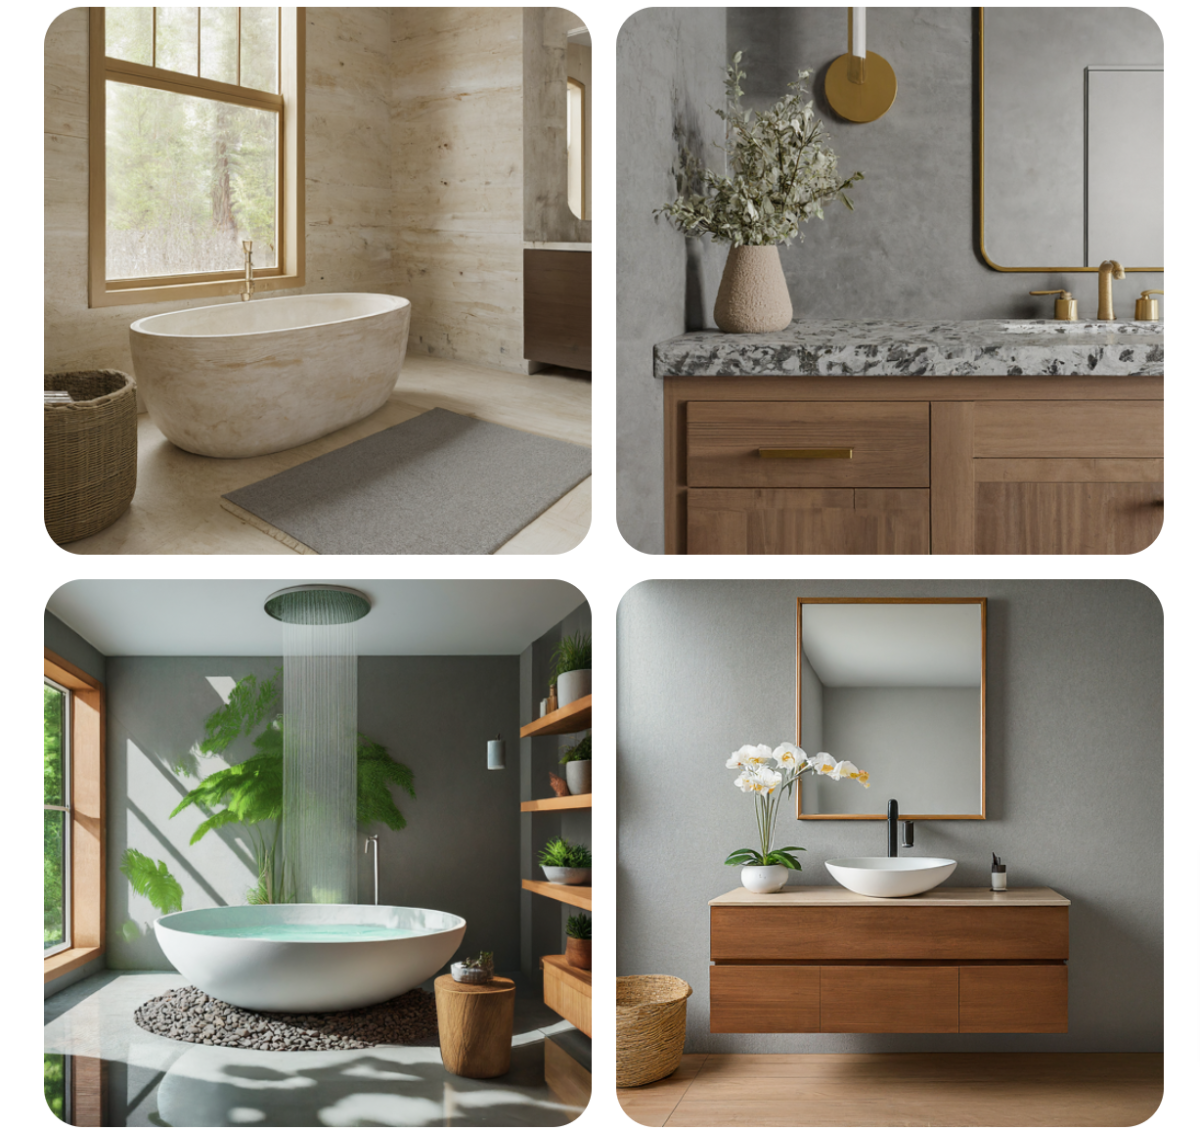 panel of 4 bathrooms with natural material design focuses